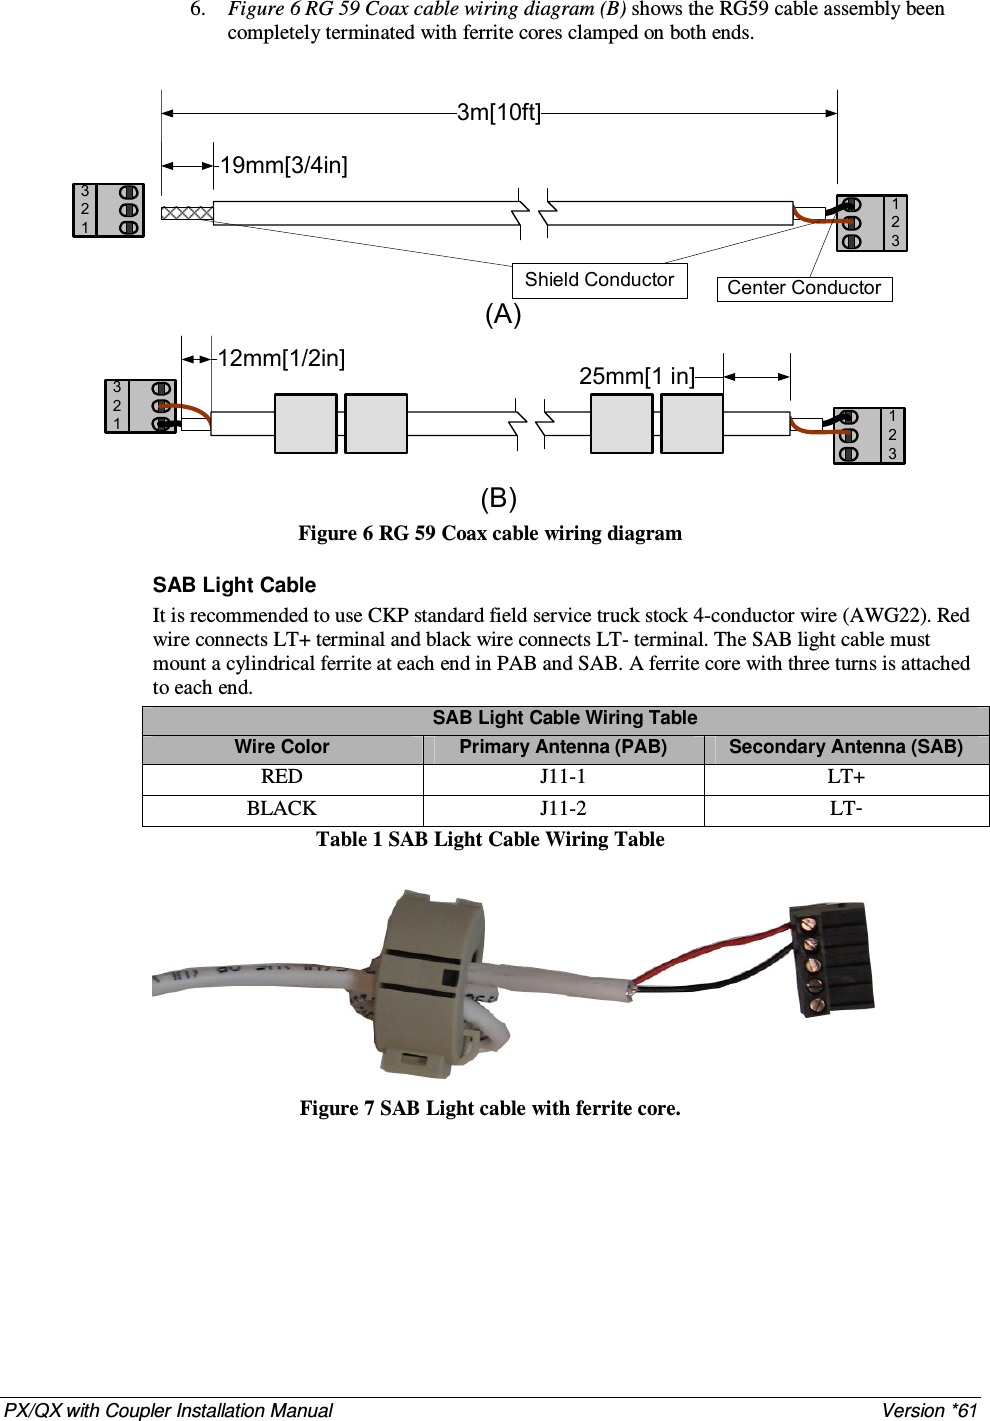 PX/QX with Coupler Installation Manual    Version *61 6. Figure 6 RG 59 Coax cable wiring diagram (B) shows the RG59 cable assembly been completely terminated with ferrite cores clamped on both ends.  1231233213m[10ft]19mm[3/4in]25mm[1 in]12mm[1/2in](A)(B)Center ConductorShield Conductor321 Figure 6 RG 59 Coax cable wiring diagram  SAB Light Cable It is recommended to use CKP standard field service truck stock 4-conductor wire (AWG22). Red wire connects LT+ terminal and black wire connects LT- terminal. The SAB light cable must mount a cylindrical ferrite at each end in PAB and SAB. A ferrite core with three turns is attached to each end. SAB Light Cable Wiring Table Wire Color  Primary Antenna (PAB)  Secondary Antenna (SAB) RED  J11-1  LT+ BLACK  J11-2  LT- Table 1 SAB Light Cable Wiring Table   Figure 7 SAB Light cable with ferrite core. 